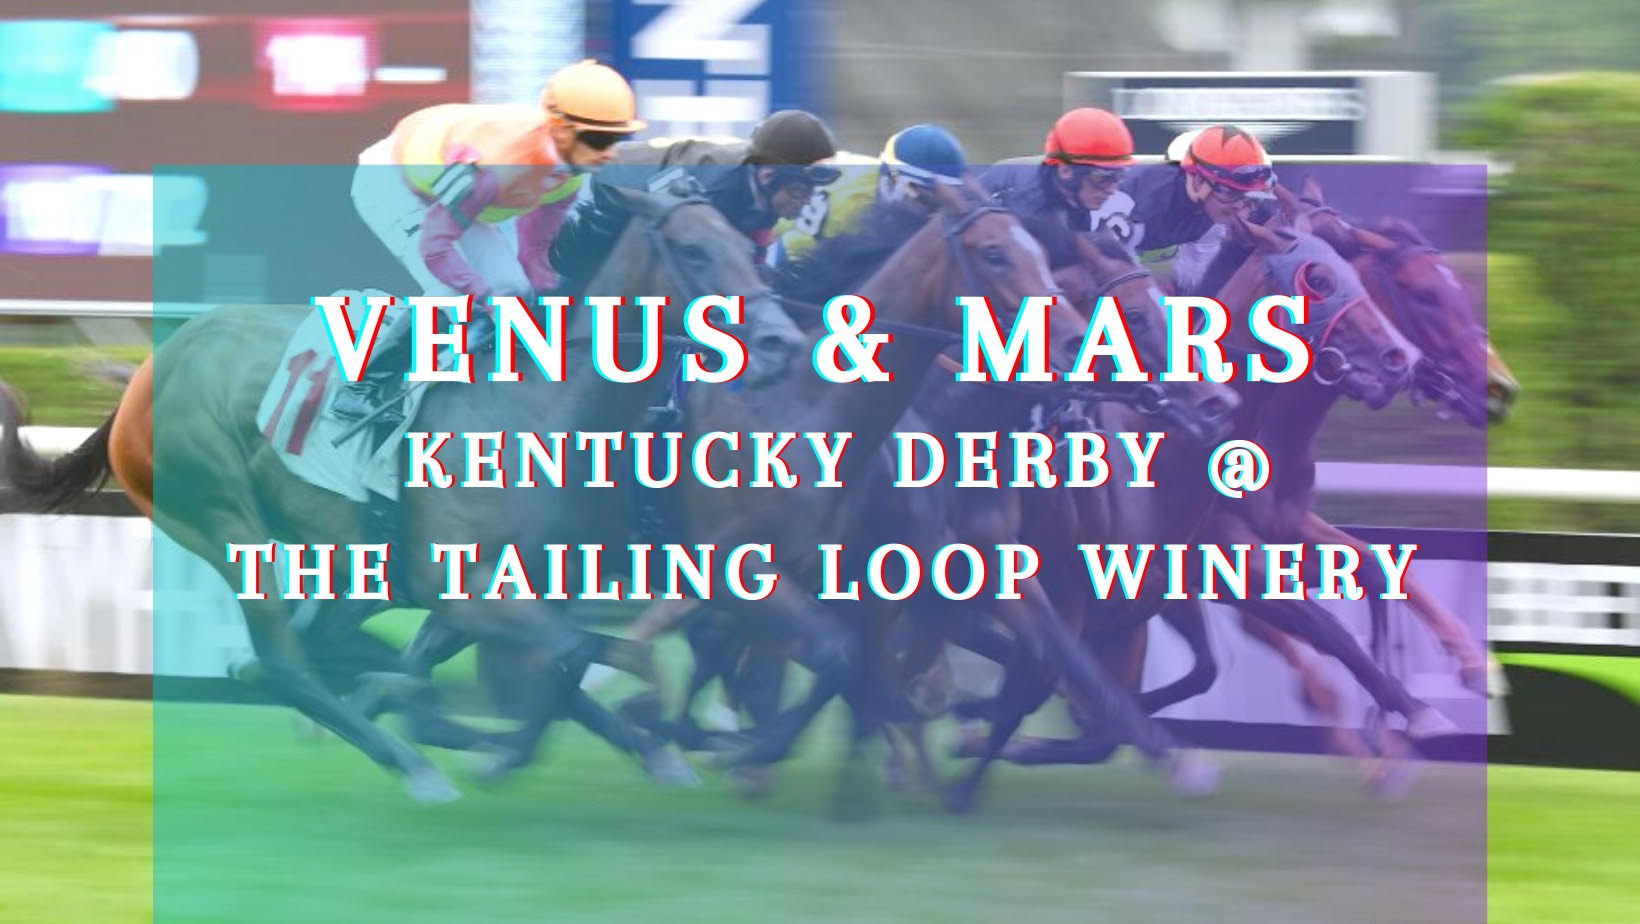 Tailing Loop Kentucky Derby Party